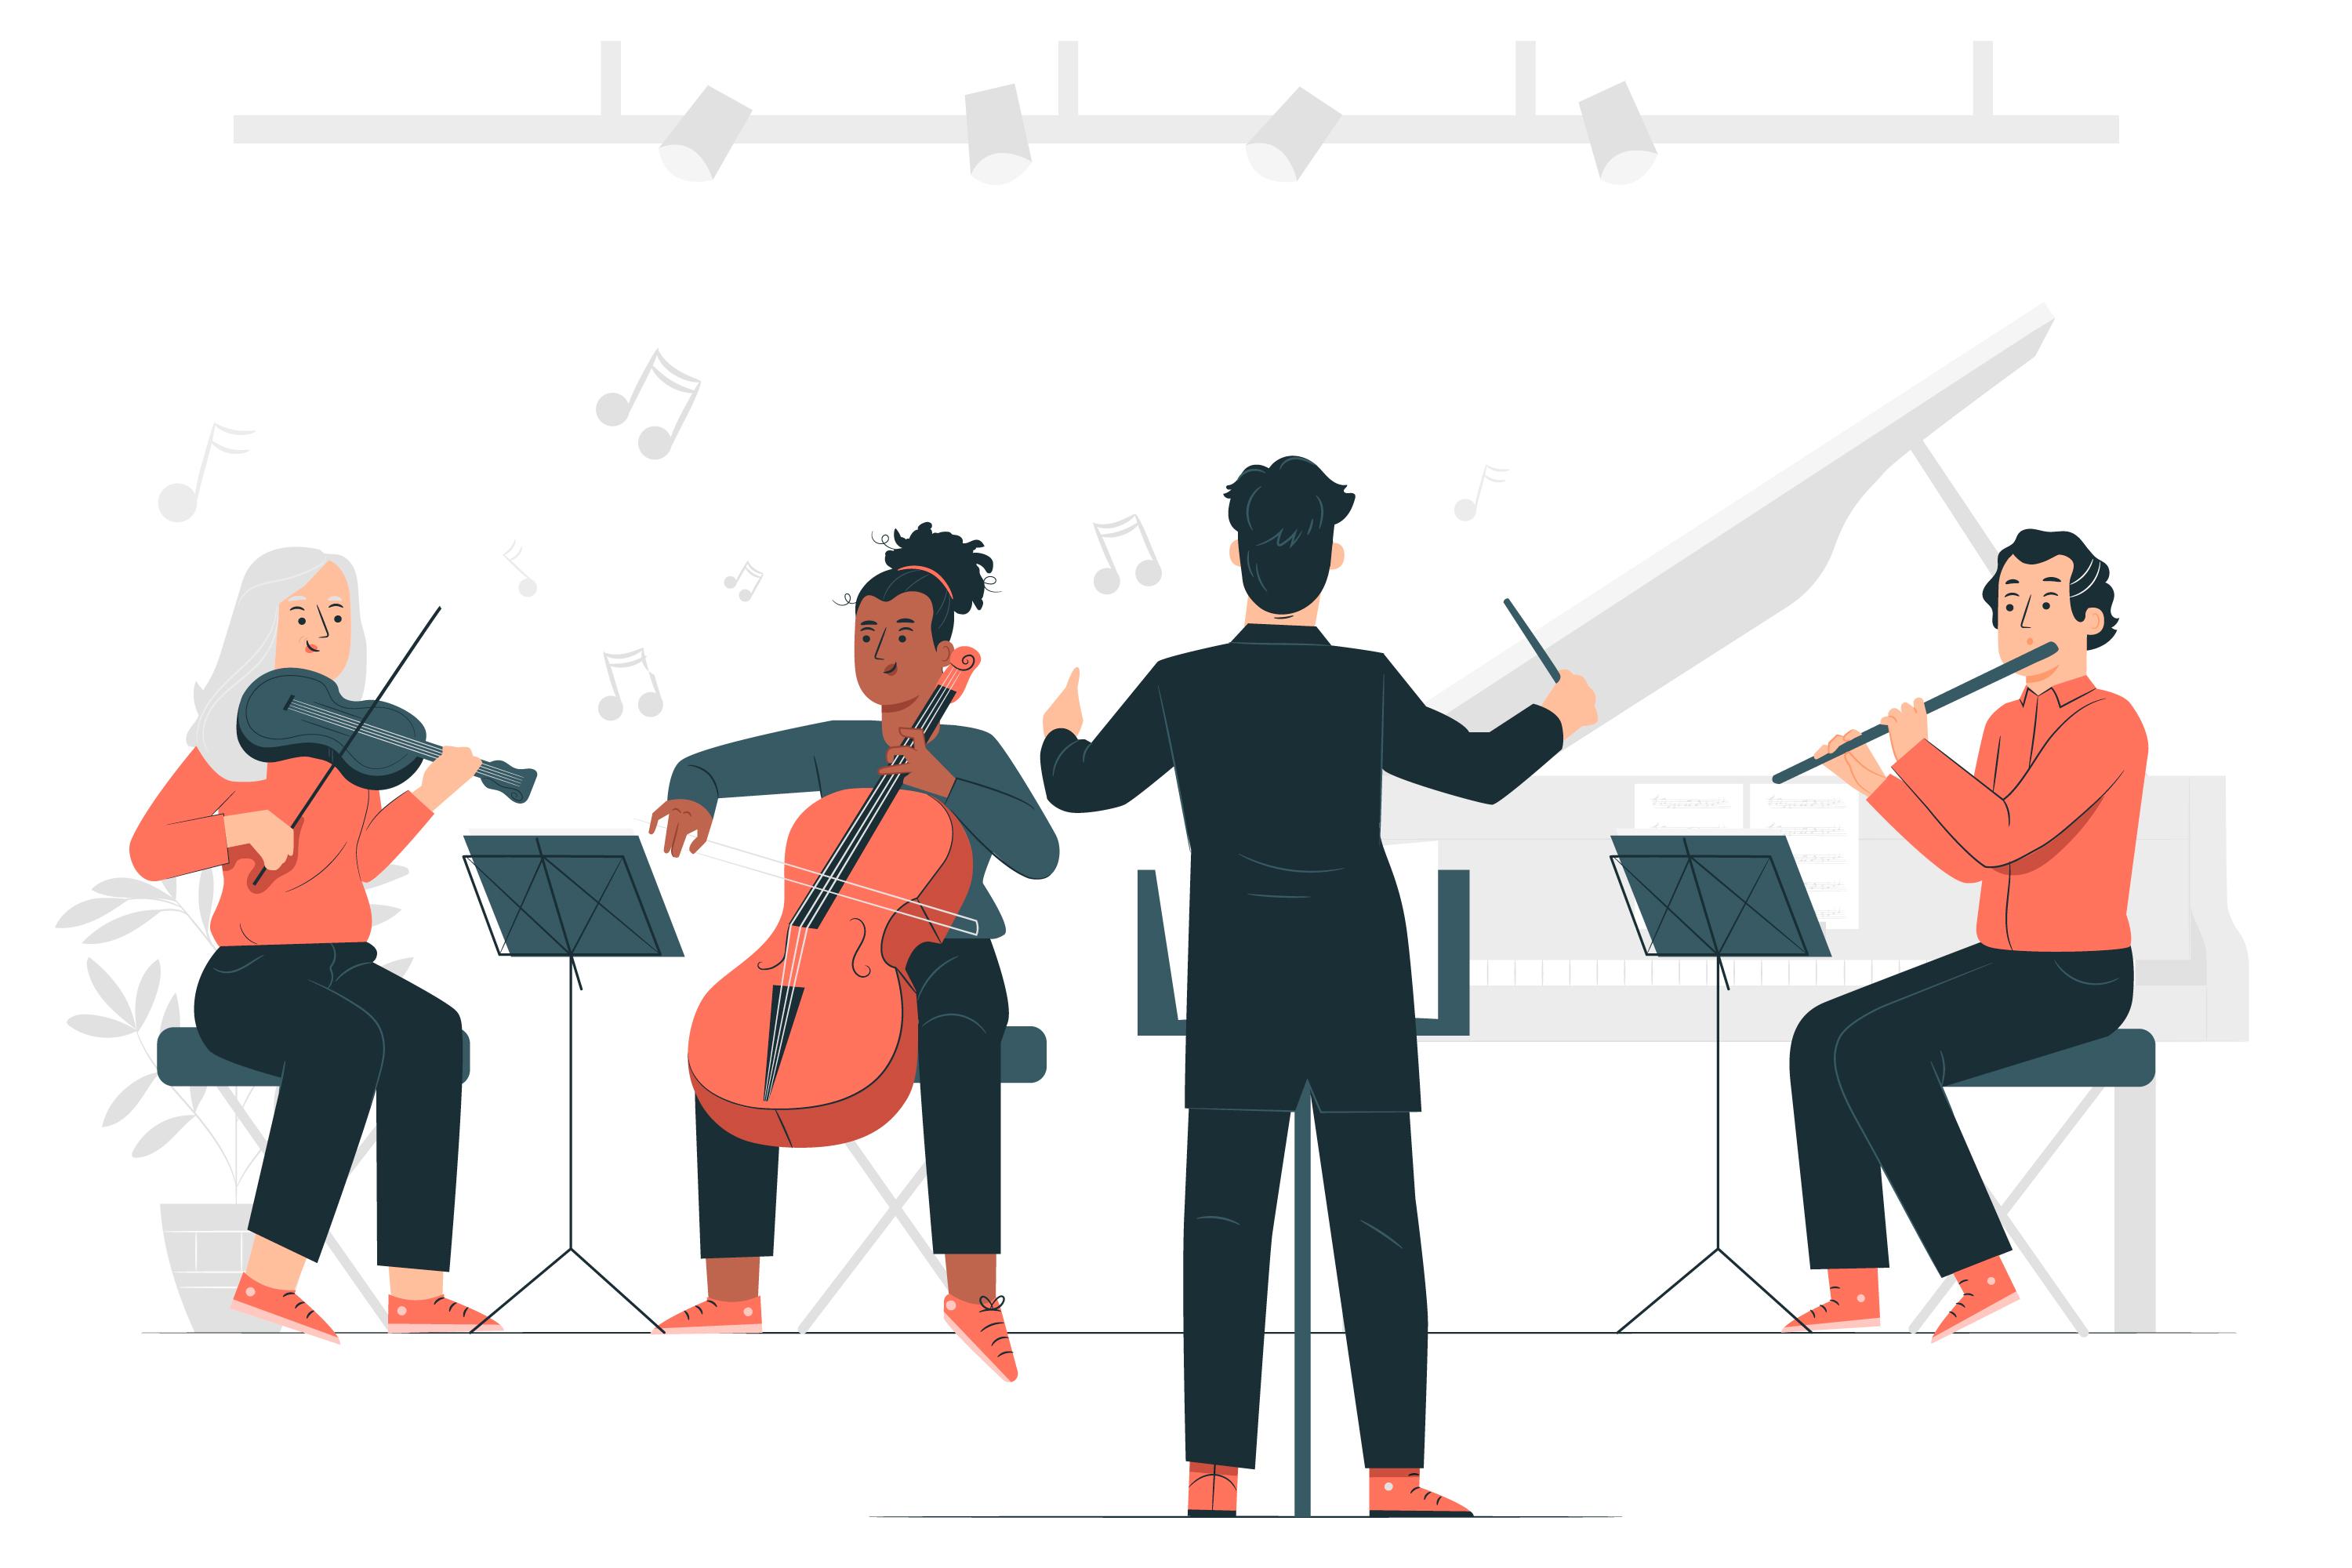 Cartoon image of director with several orchestra musicians